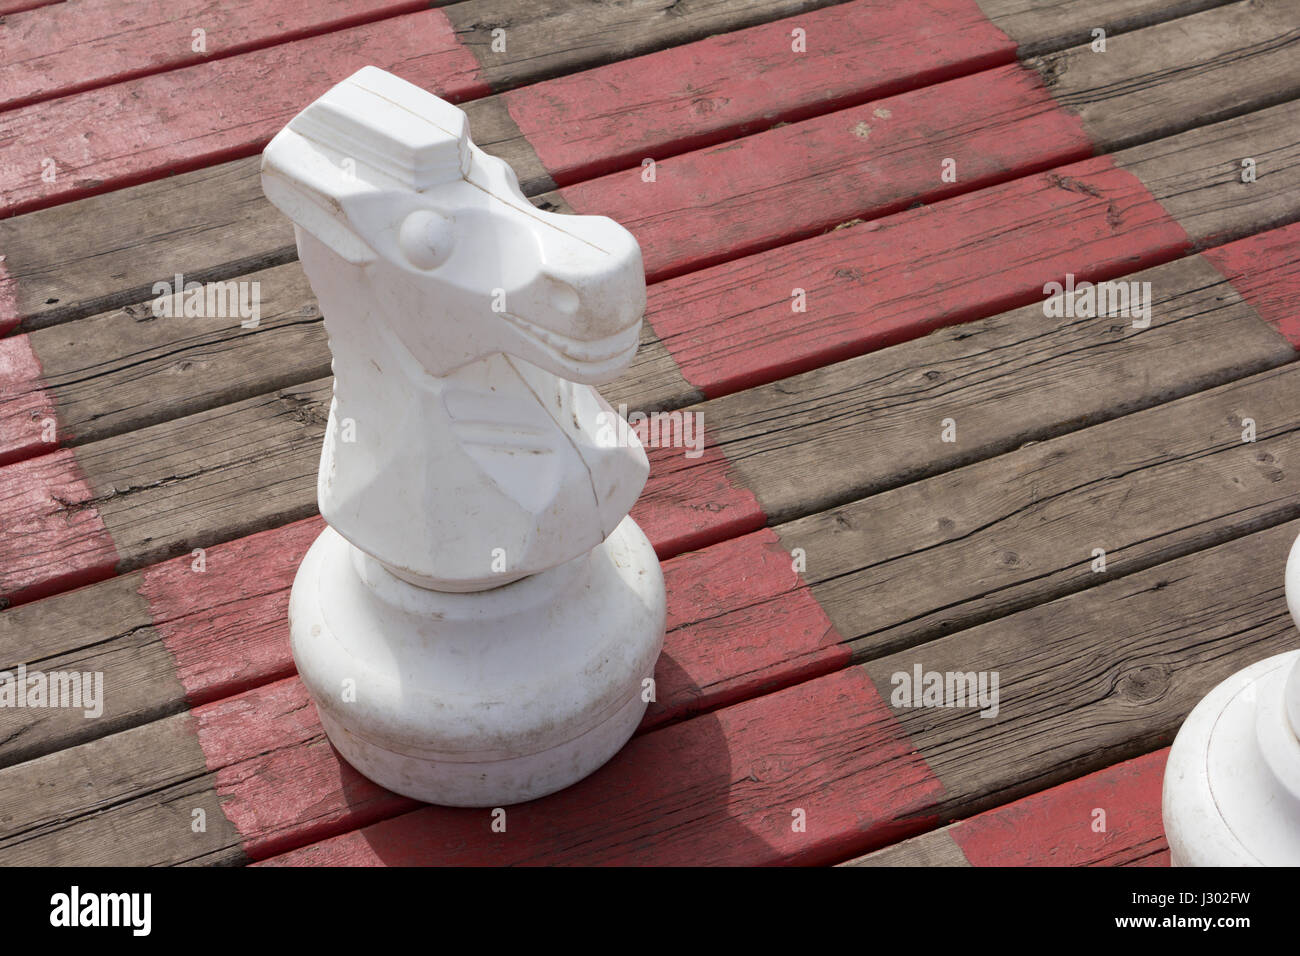 A large knight chess piece on an oversized board. Stock Photo